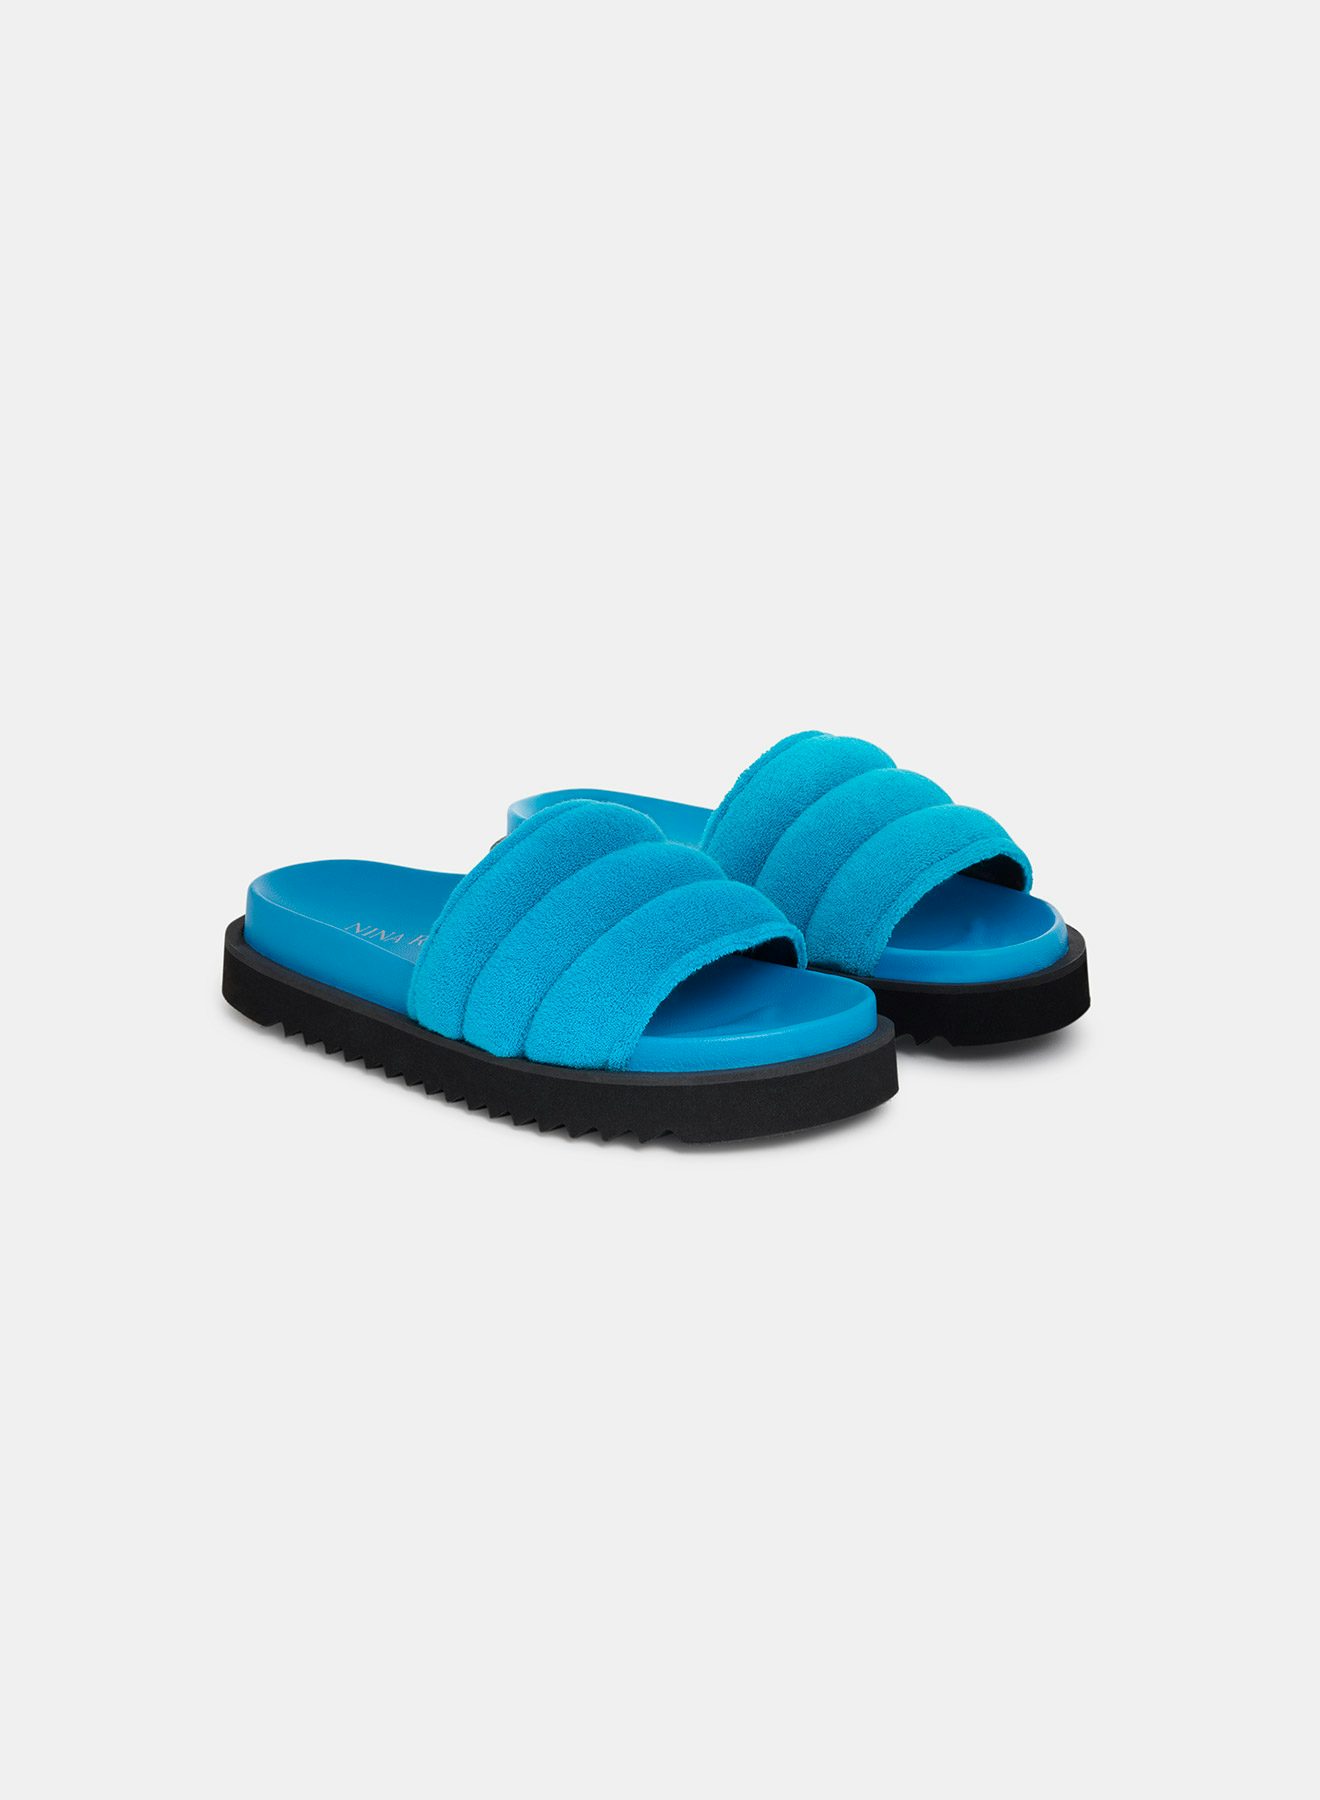 Cyan Topstitched Terry Cloth Slides And Turquoise Leather Sole - Nina Ricci